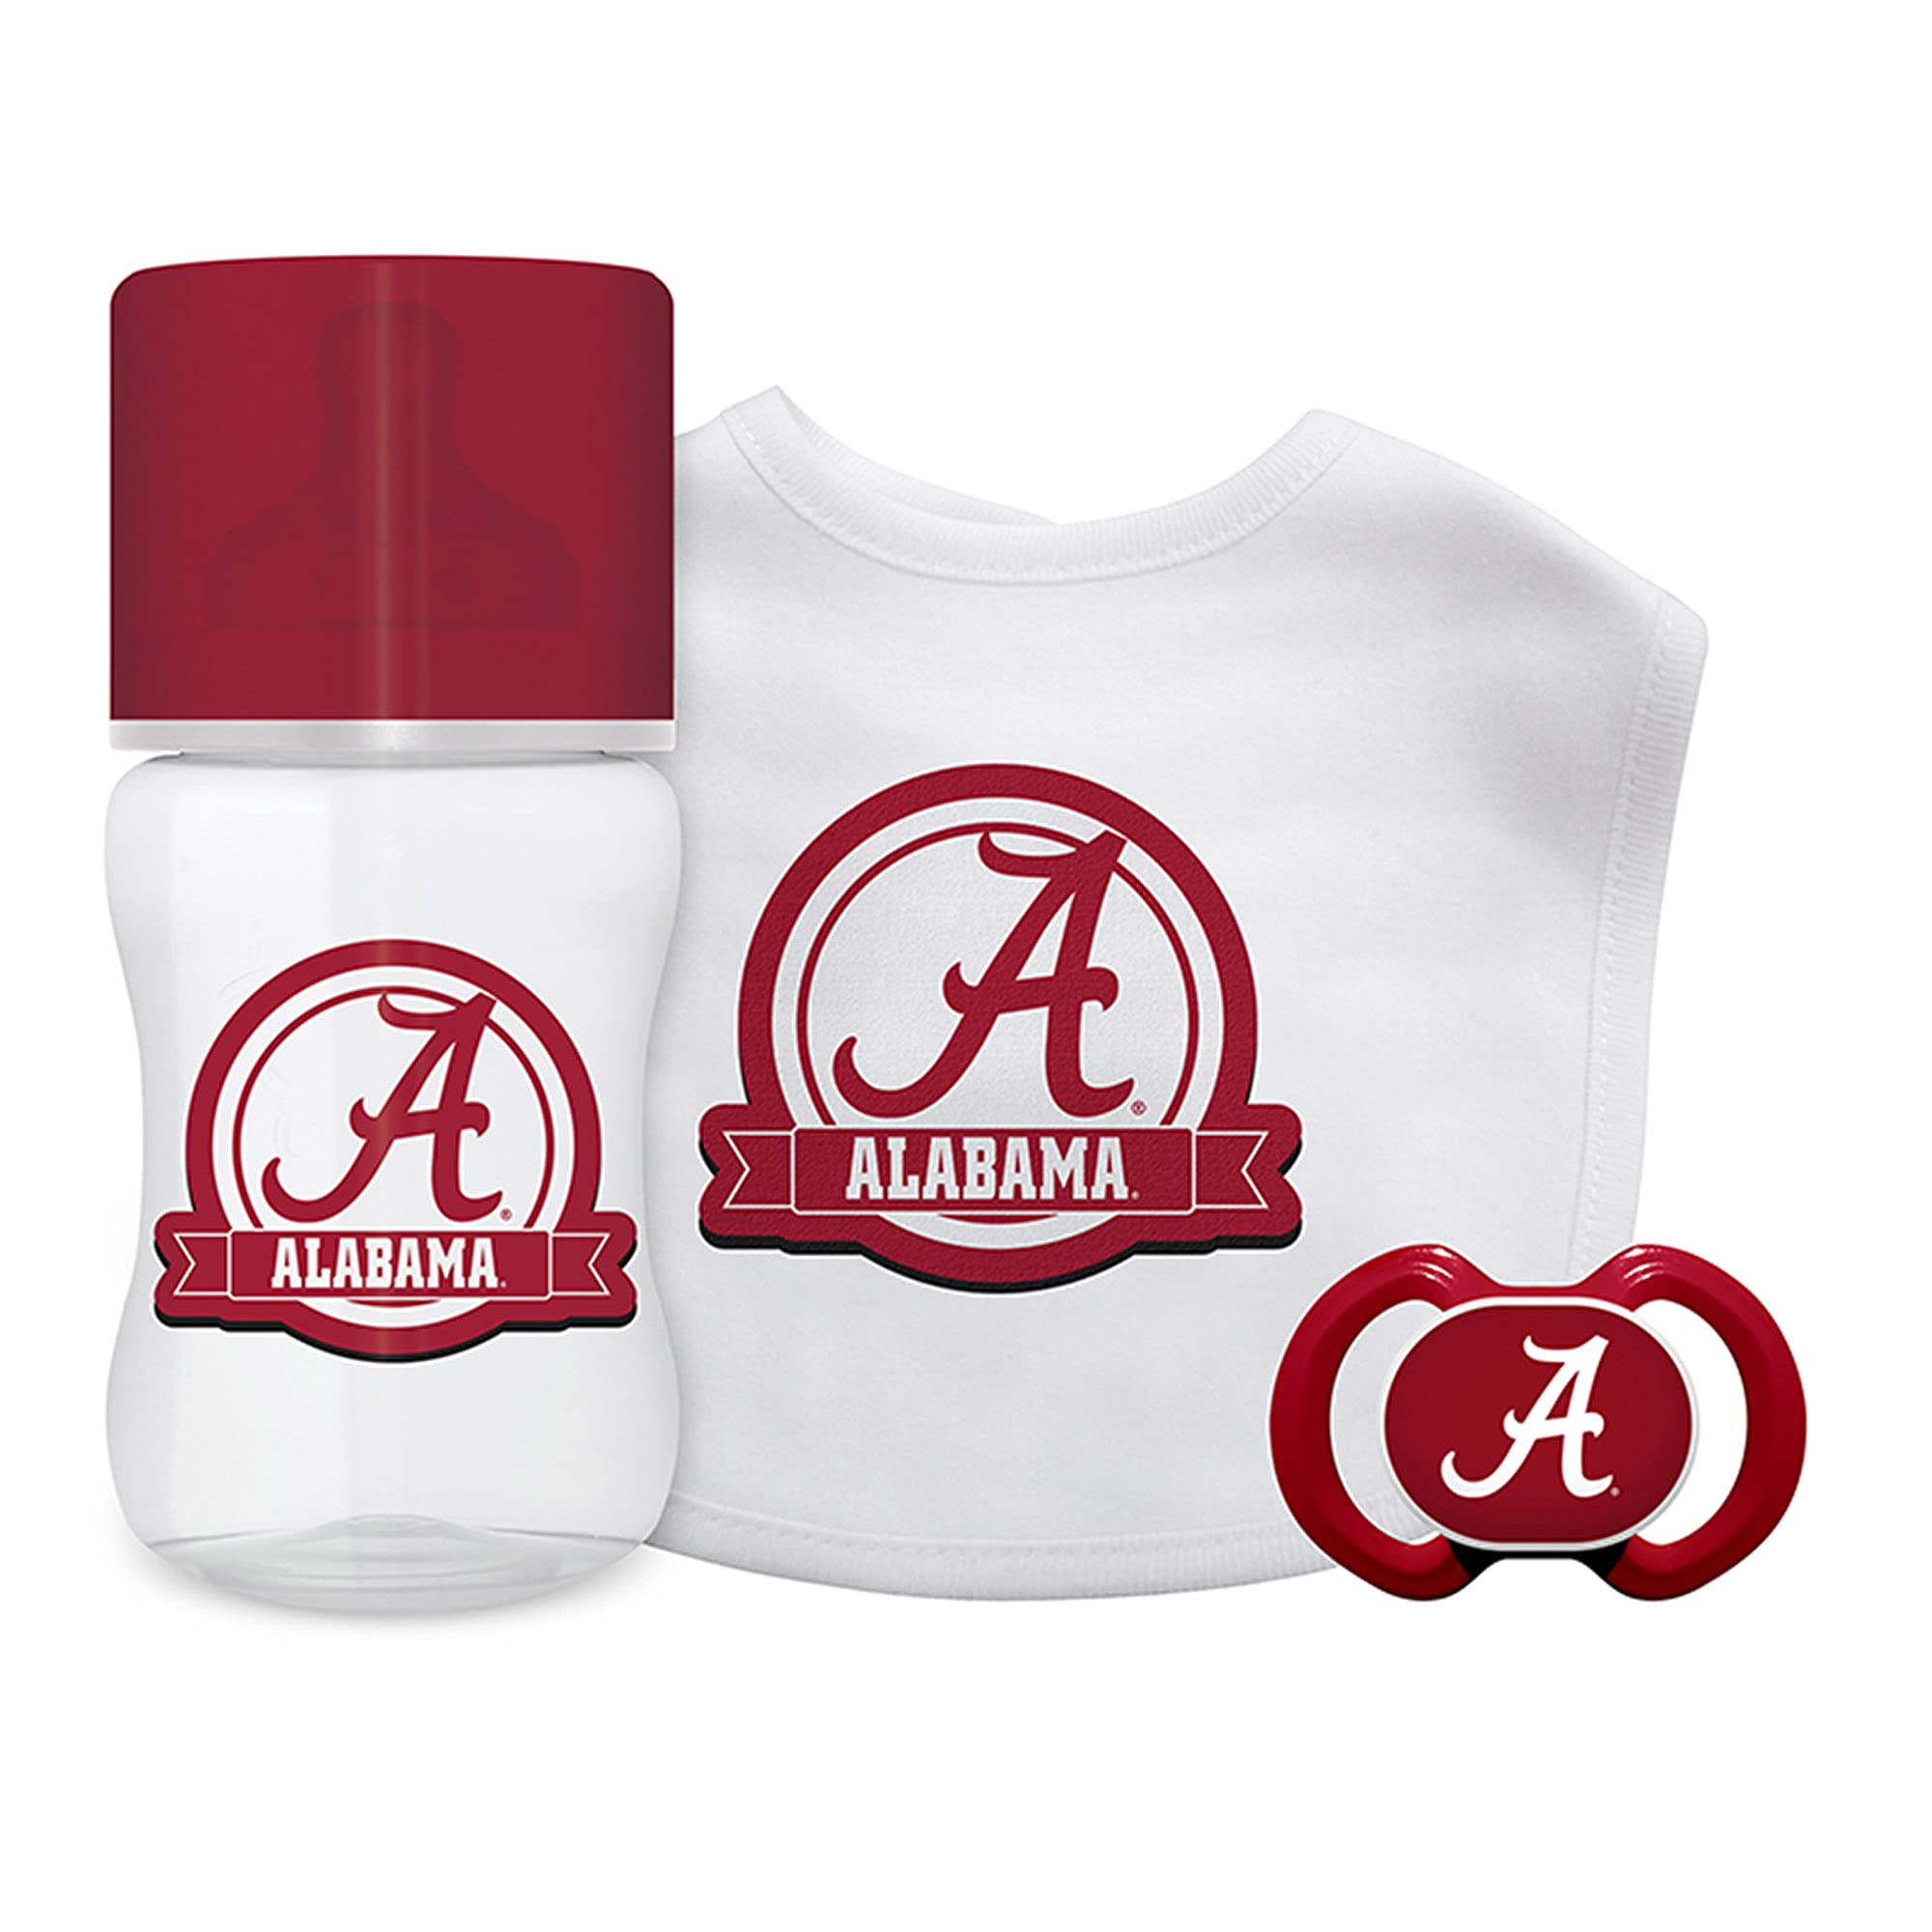 Baby Fanatic MasterPieces BabyFanatic 3 Piece Gift Set - NCAA Alabama Crimson Tide - Officially Licensed Baby Apparel